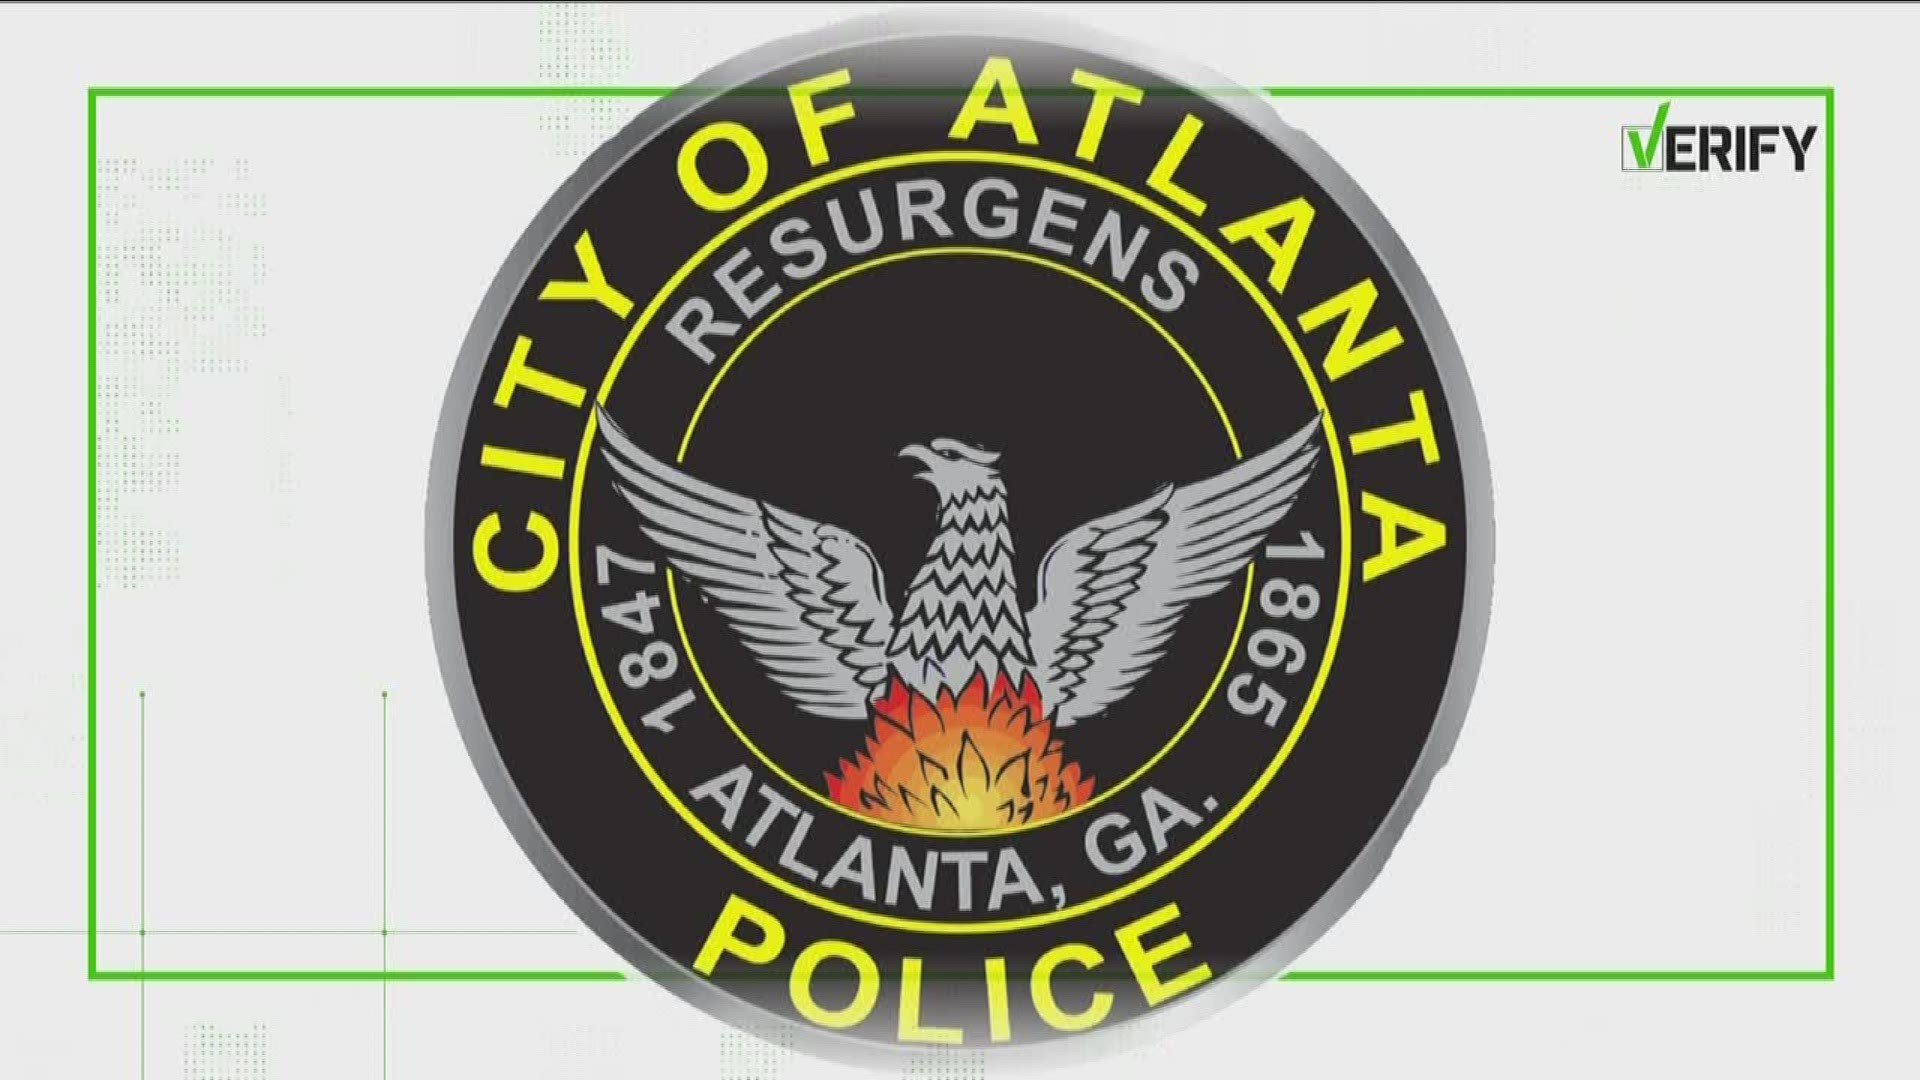 Liza Lucas spoke with the Atlanta Police Department to get to the bottom of the viral post.